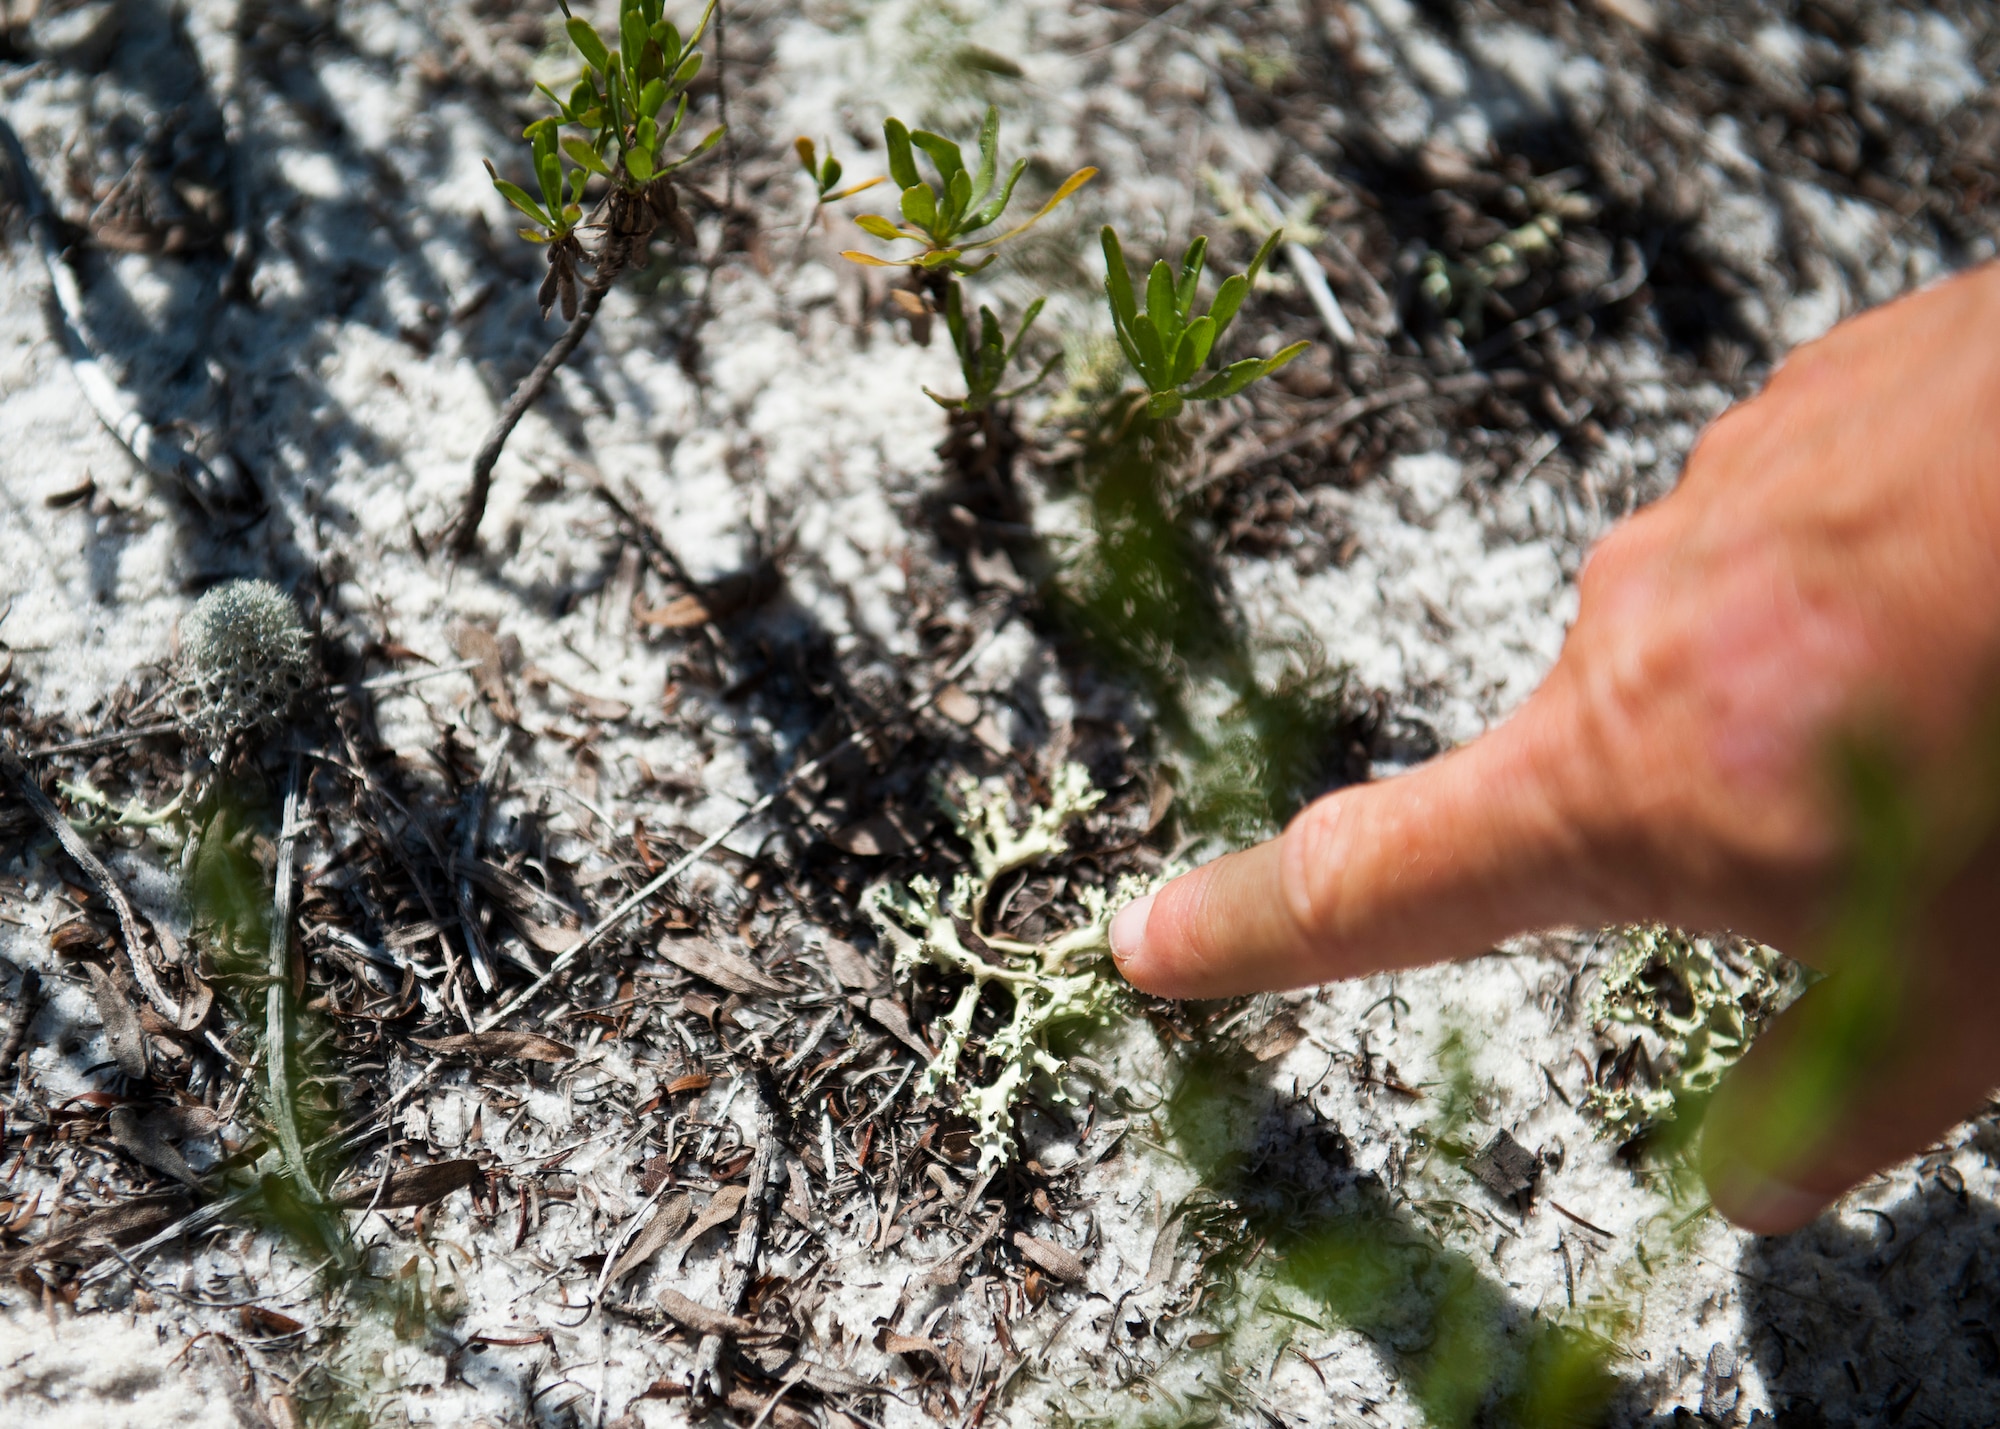 Endangered Species Biologist, Kathy Gault, 96th Civil Engineer Group, points out a cladonia perforata growing on the Santa Rosa Island Range July 14 at Eglin Air Force Base, Fla. The organism also known as a “deer lichen” is part of the Florida sub-tropical ecosystem and is on the federal list of endangered species of the U.S. The 96th CEG’s, Jackson Guard biologists and volunteers track and monitor wildlife on the water range. The information gathered is used to avoid and protect wildlife during military test and training missions. (U.S. Air Force photo/Ilka Cole) 